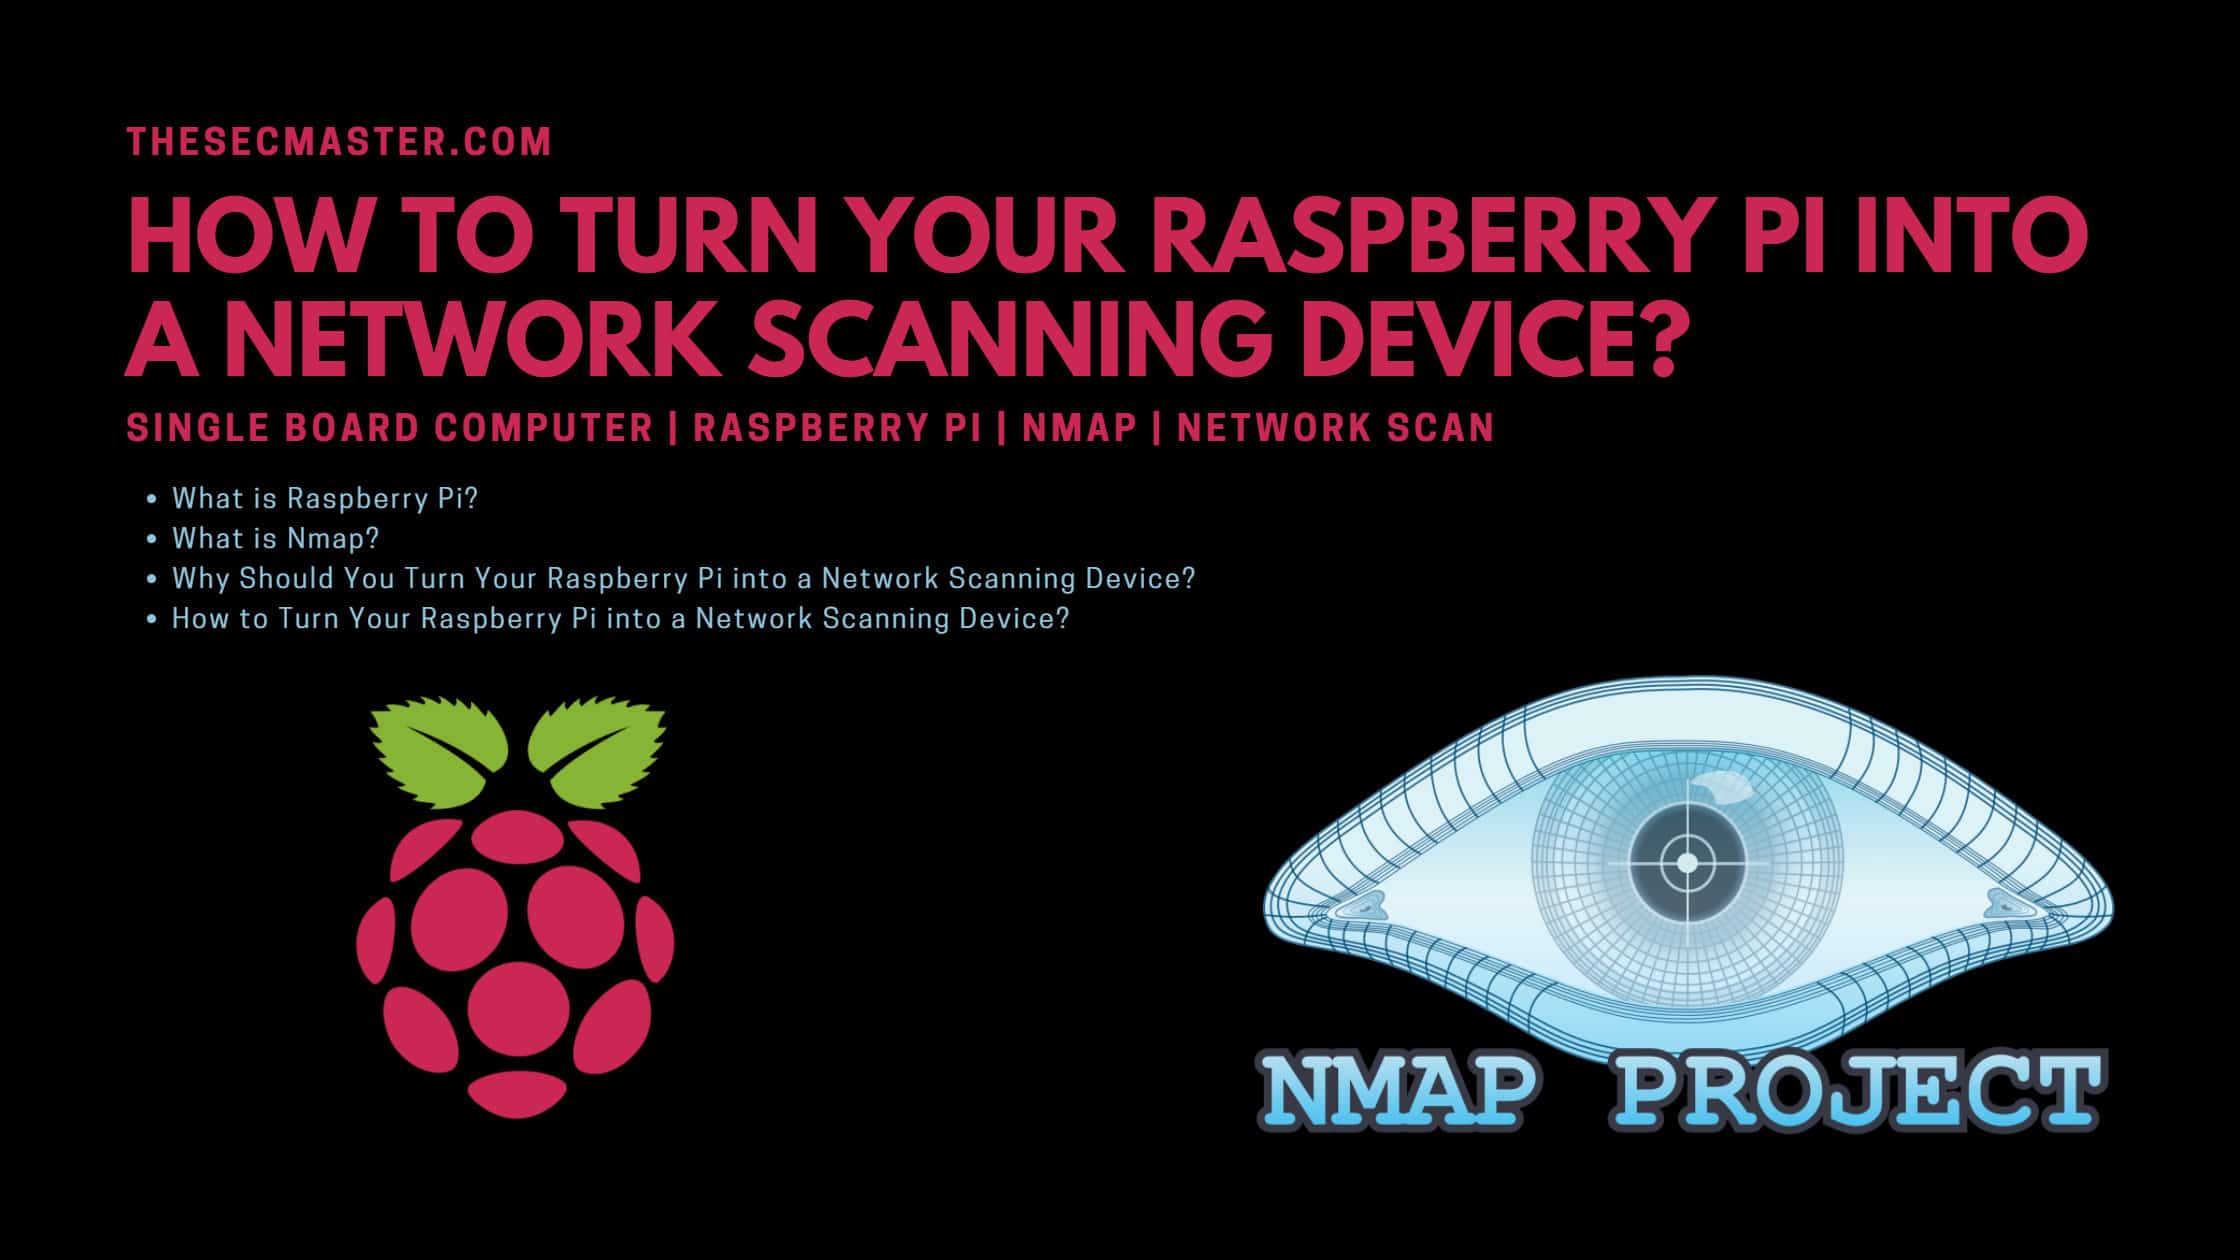 How To Turn Your Raspberry Pi Into A Network Scanning Device